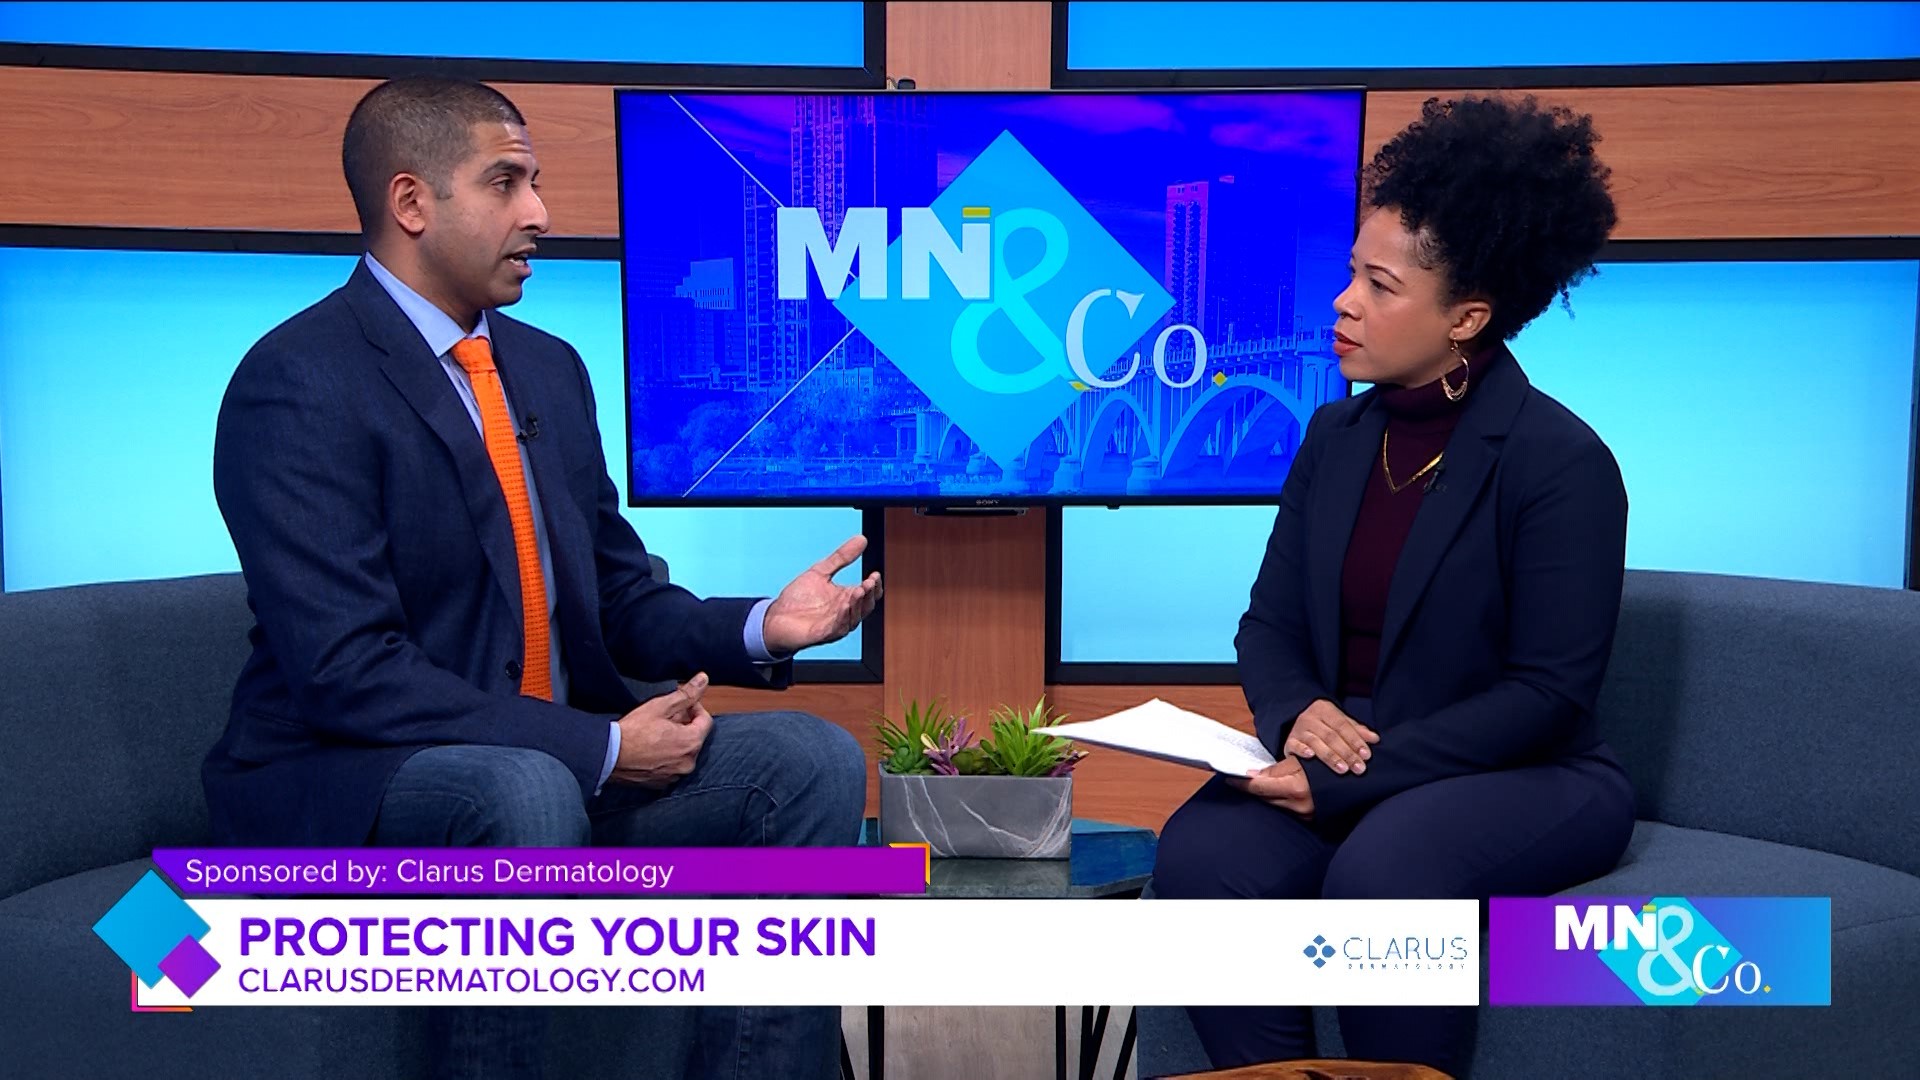 Clarus Dermatology joins Minnesota and Company to discuss essential tips against harmful UV rays and how to protect your skin effectively.